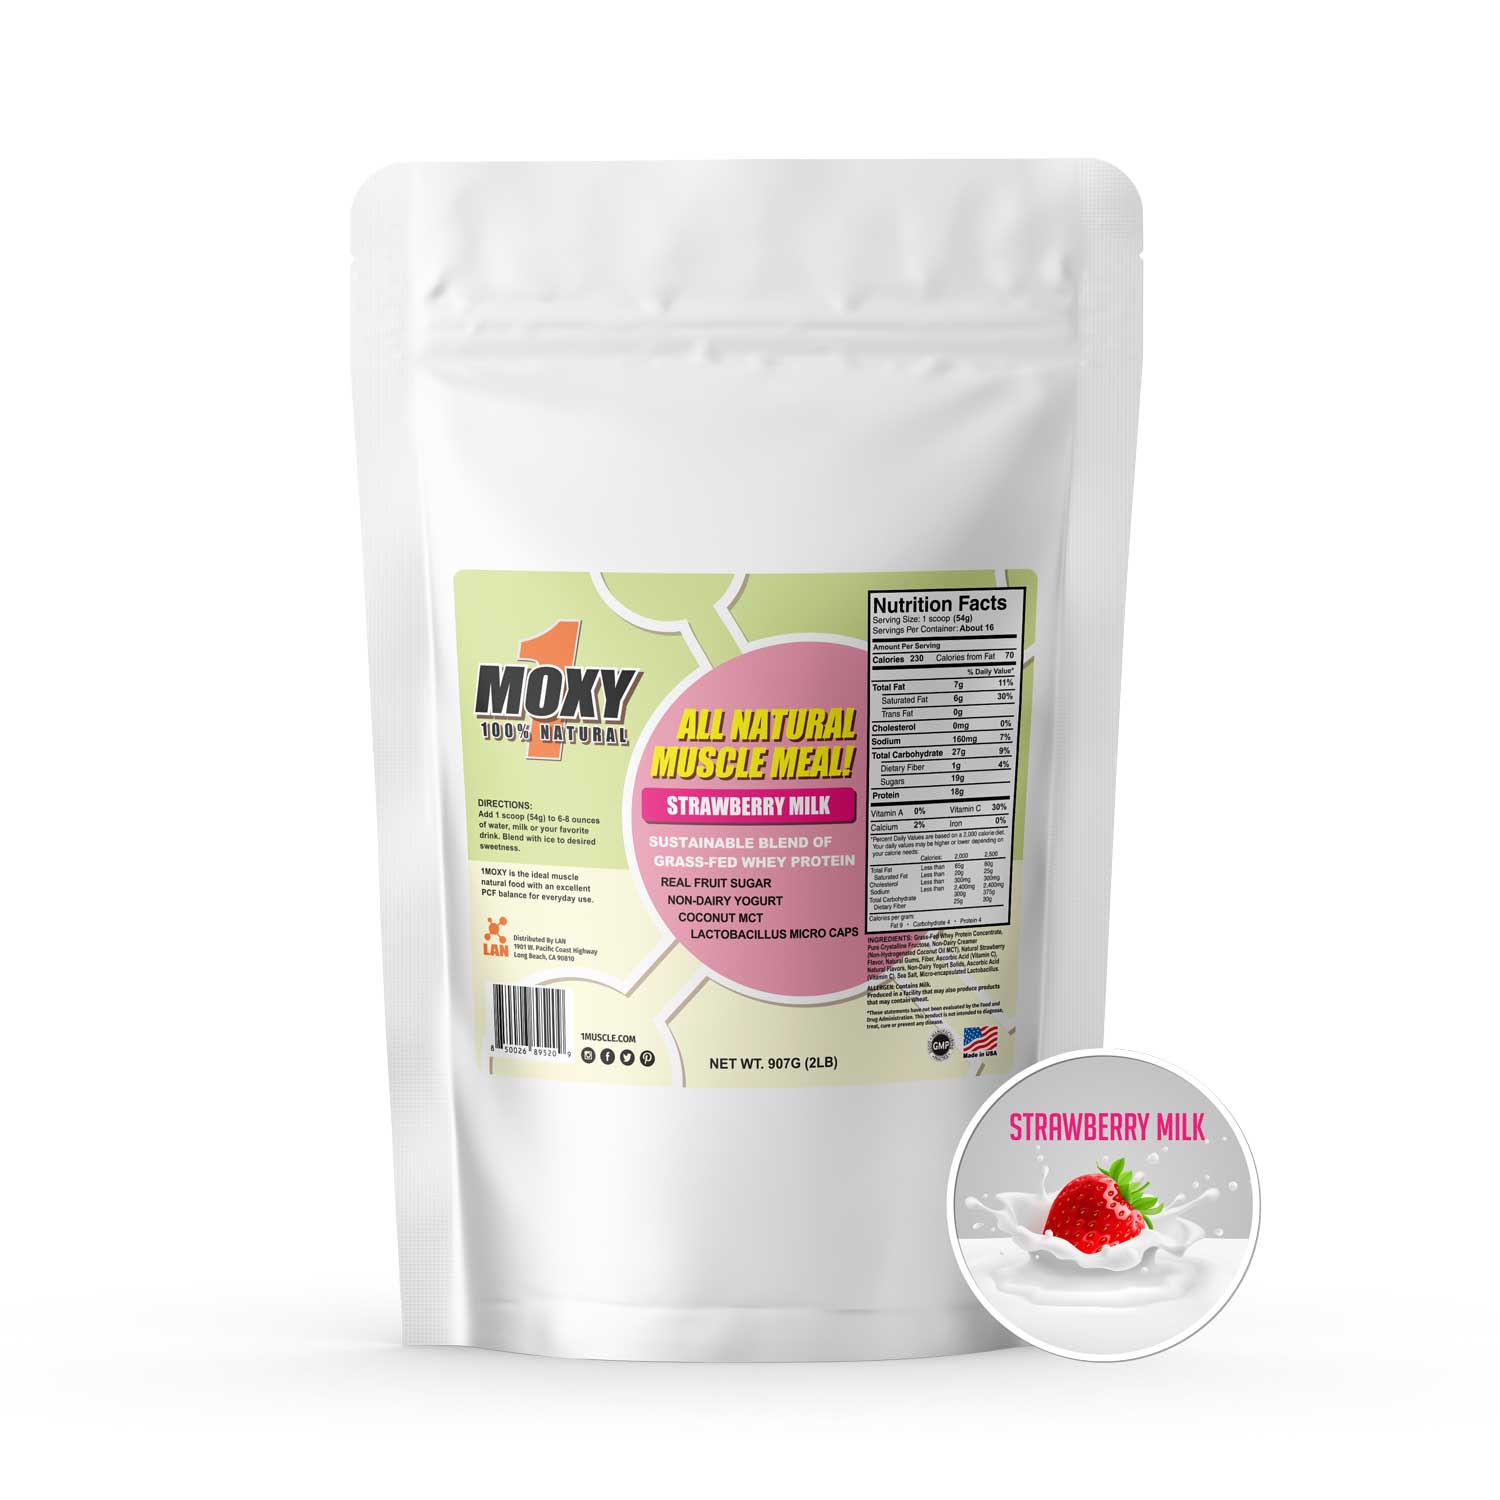 1MOXY STRAWBERRY MILK [ALL NATURAL] 907G - 1Muscle.com